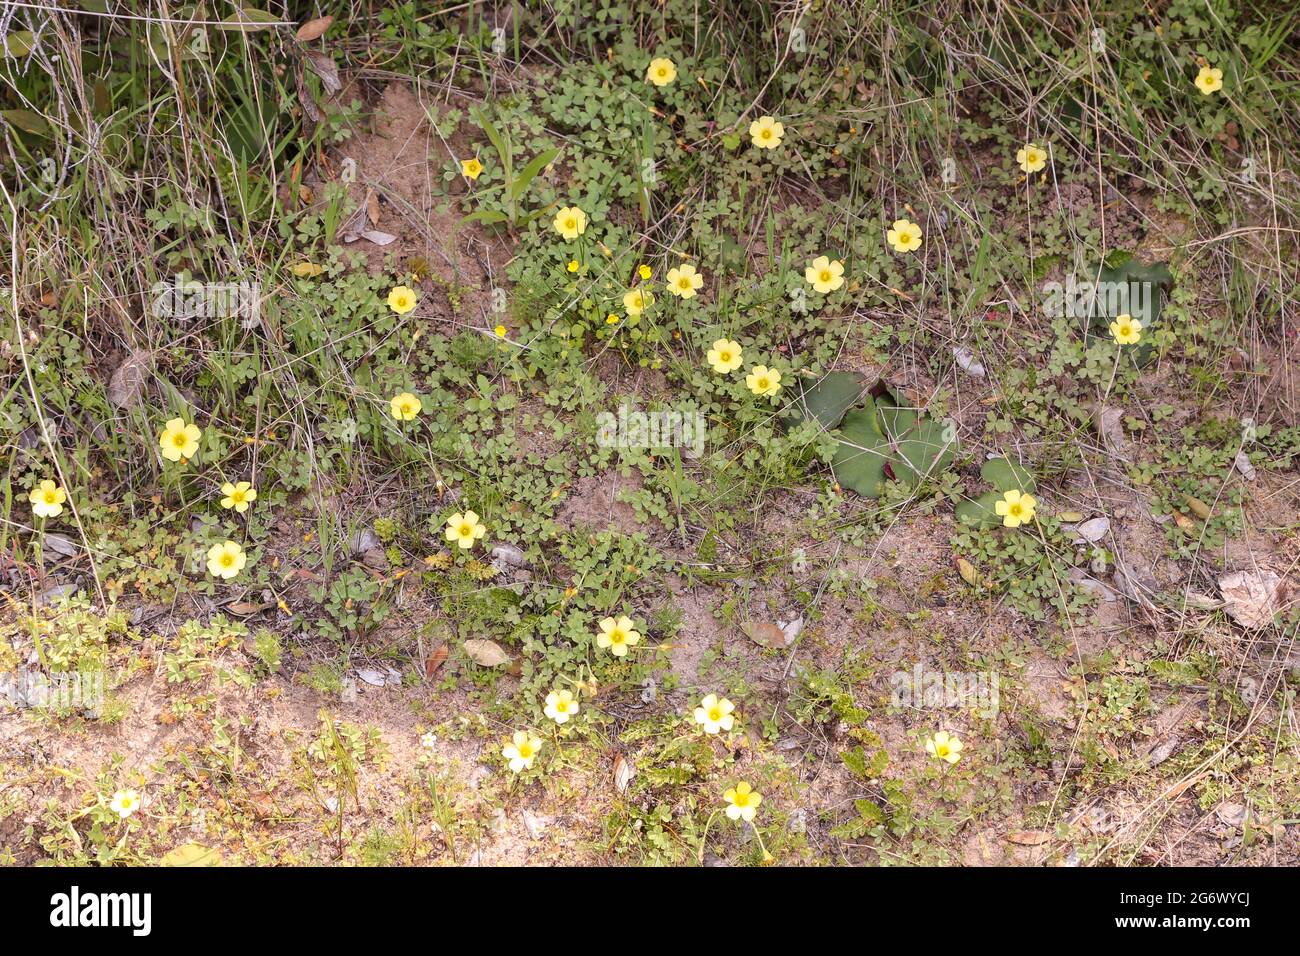 Some yellow flowers of an Oxalis sp. seen in natural habitat near Nieuwoudtville in the Northern Cape of South Africa Stock Photo